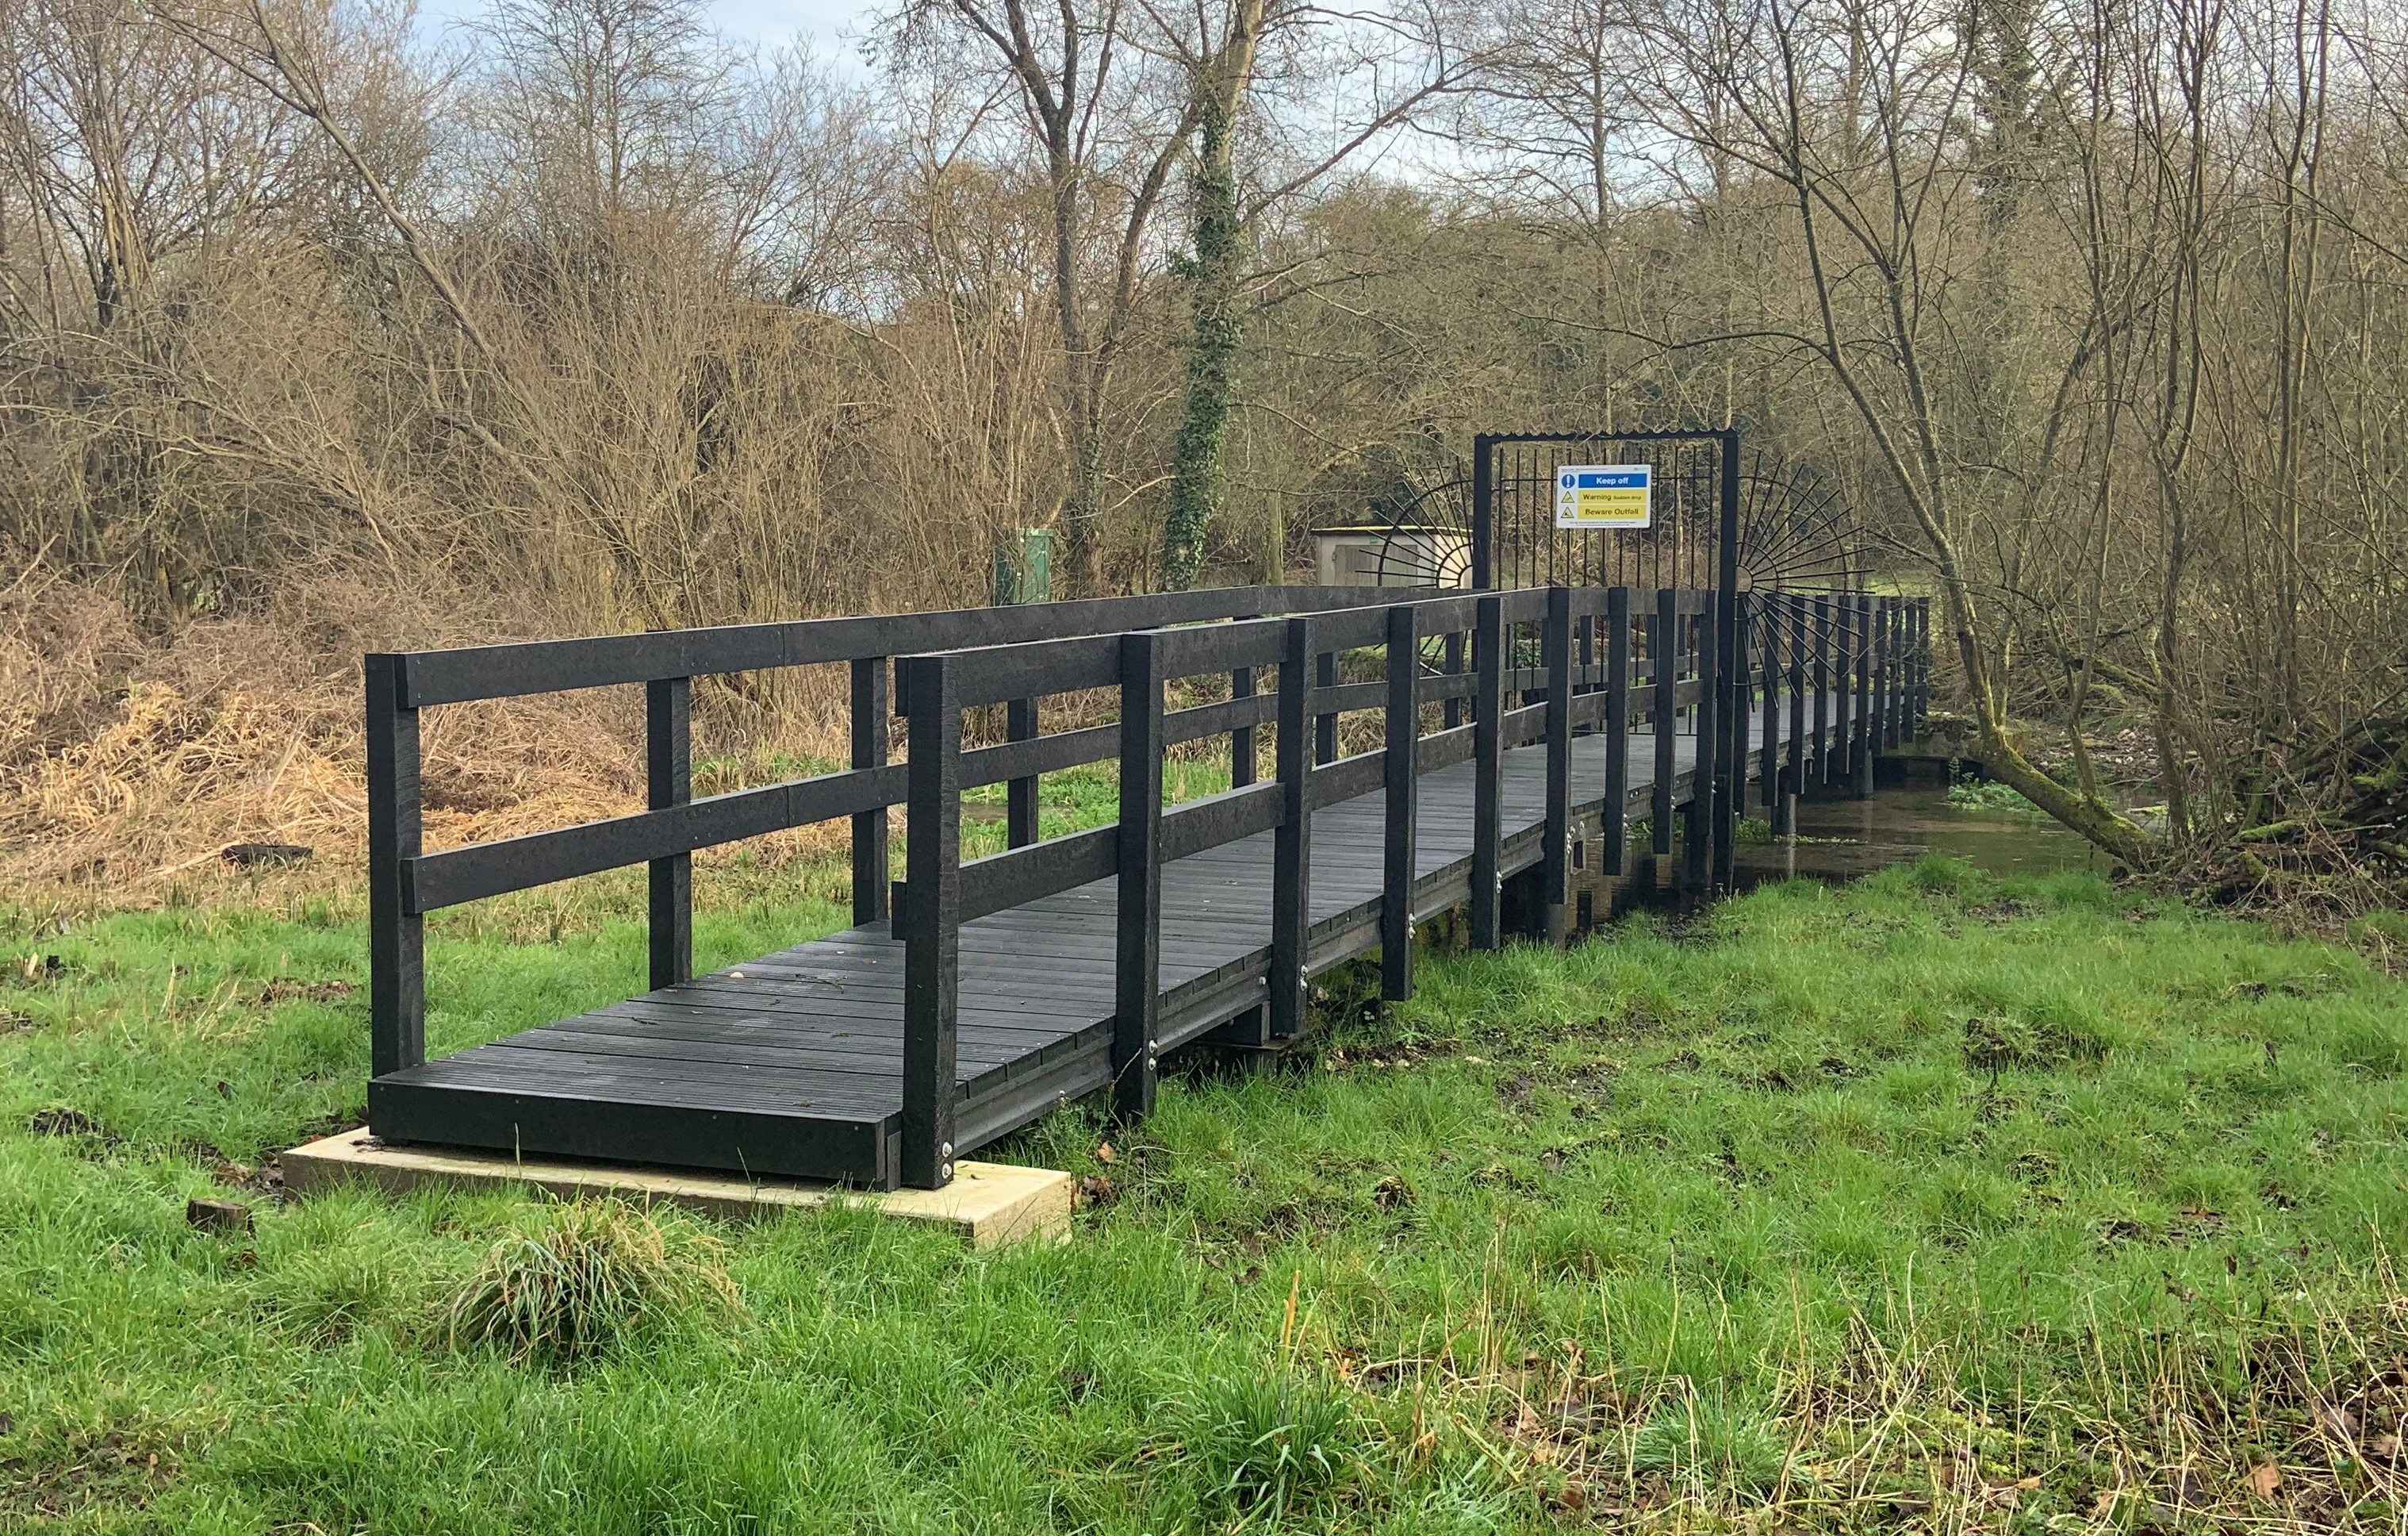 The installation of the KLP plastic bridge in the hamlet of Bagnor was undertaken by ECS Engineering Services, which regularly works with the Environment Agency.